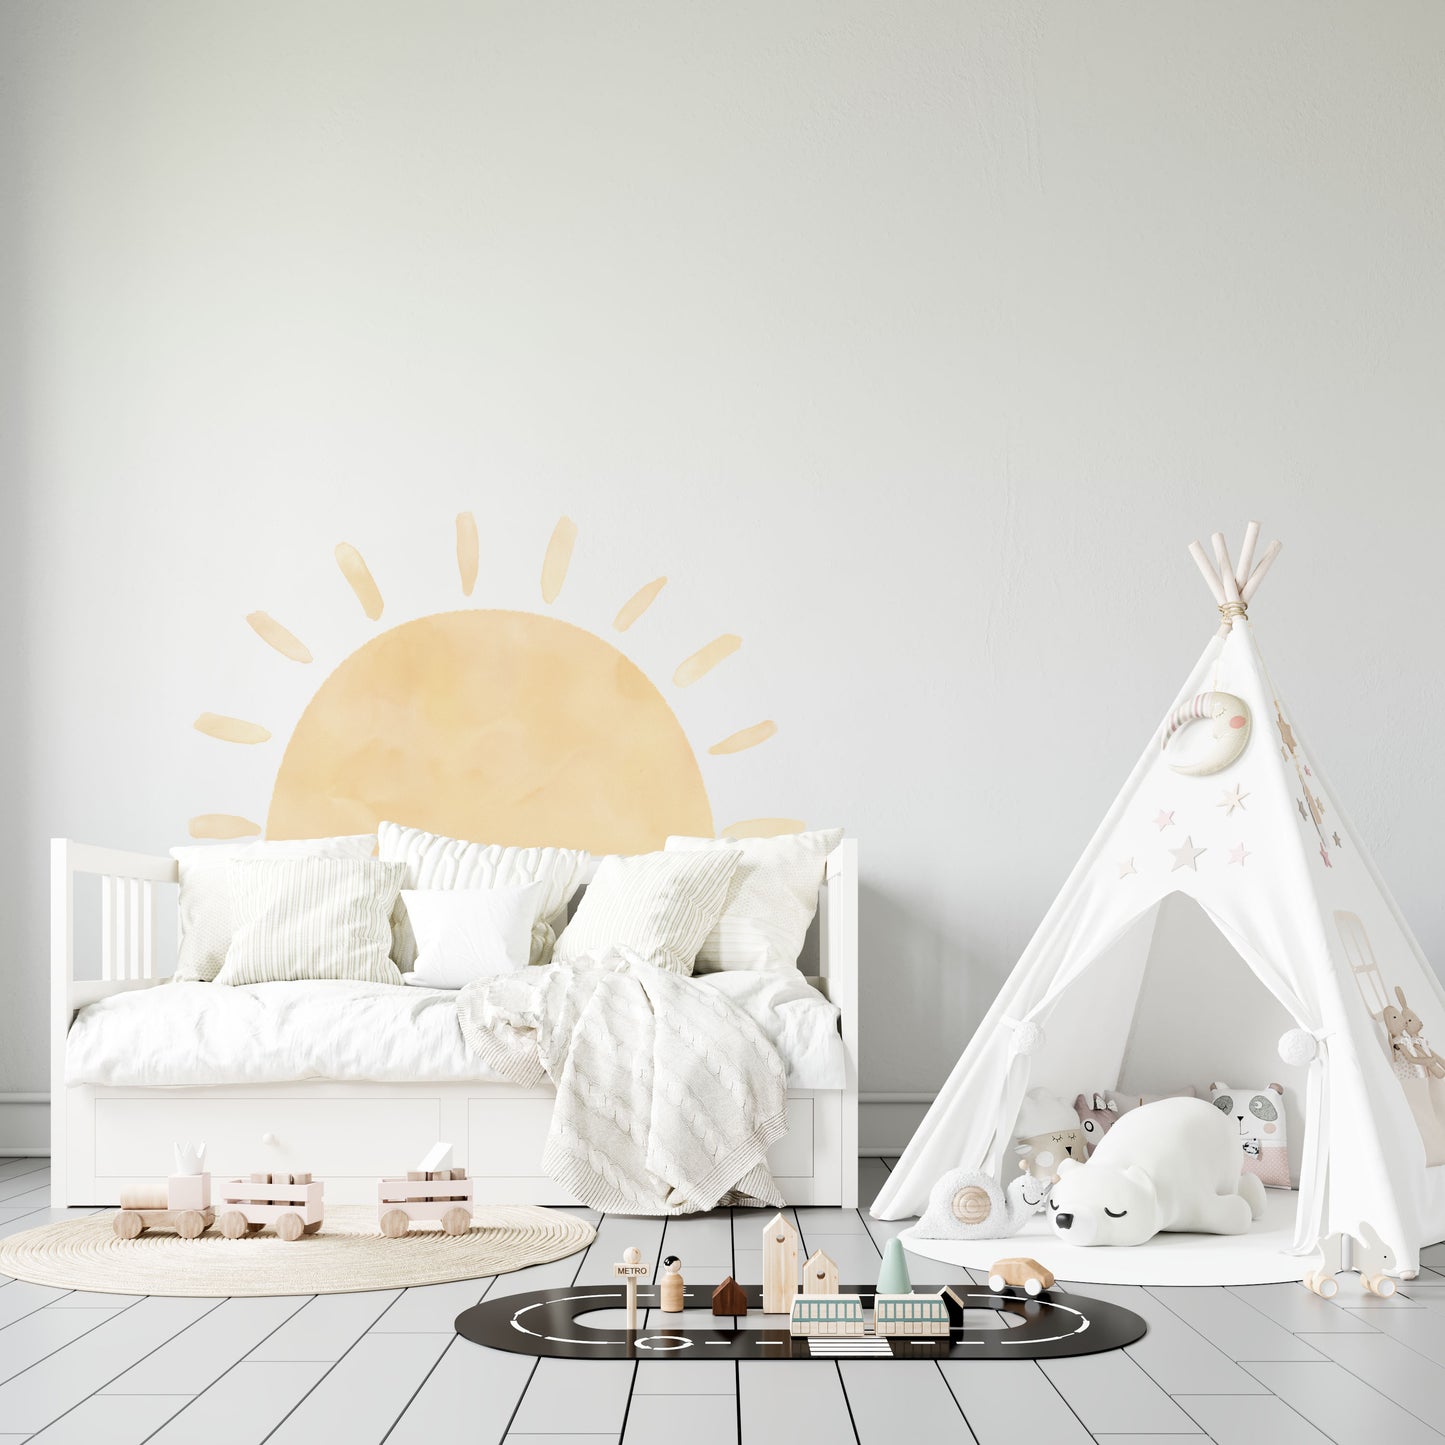 Sun Wall Decal - Wall Decals Australia - Fable and Fawn 